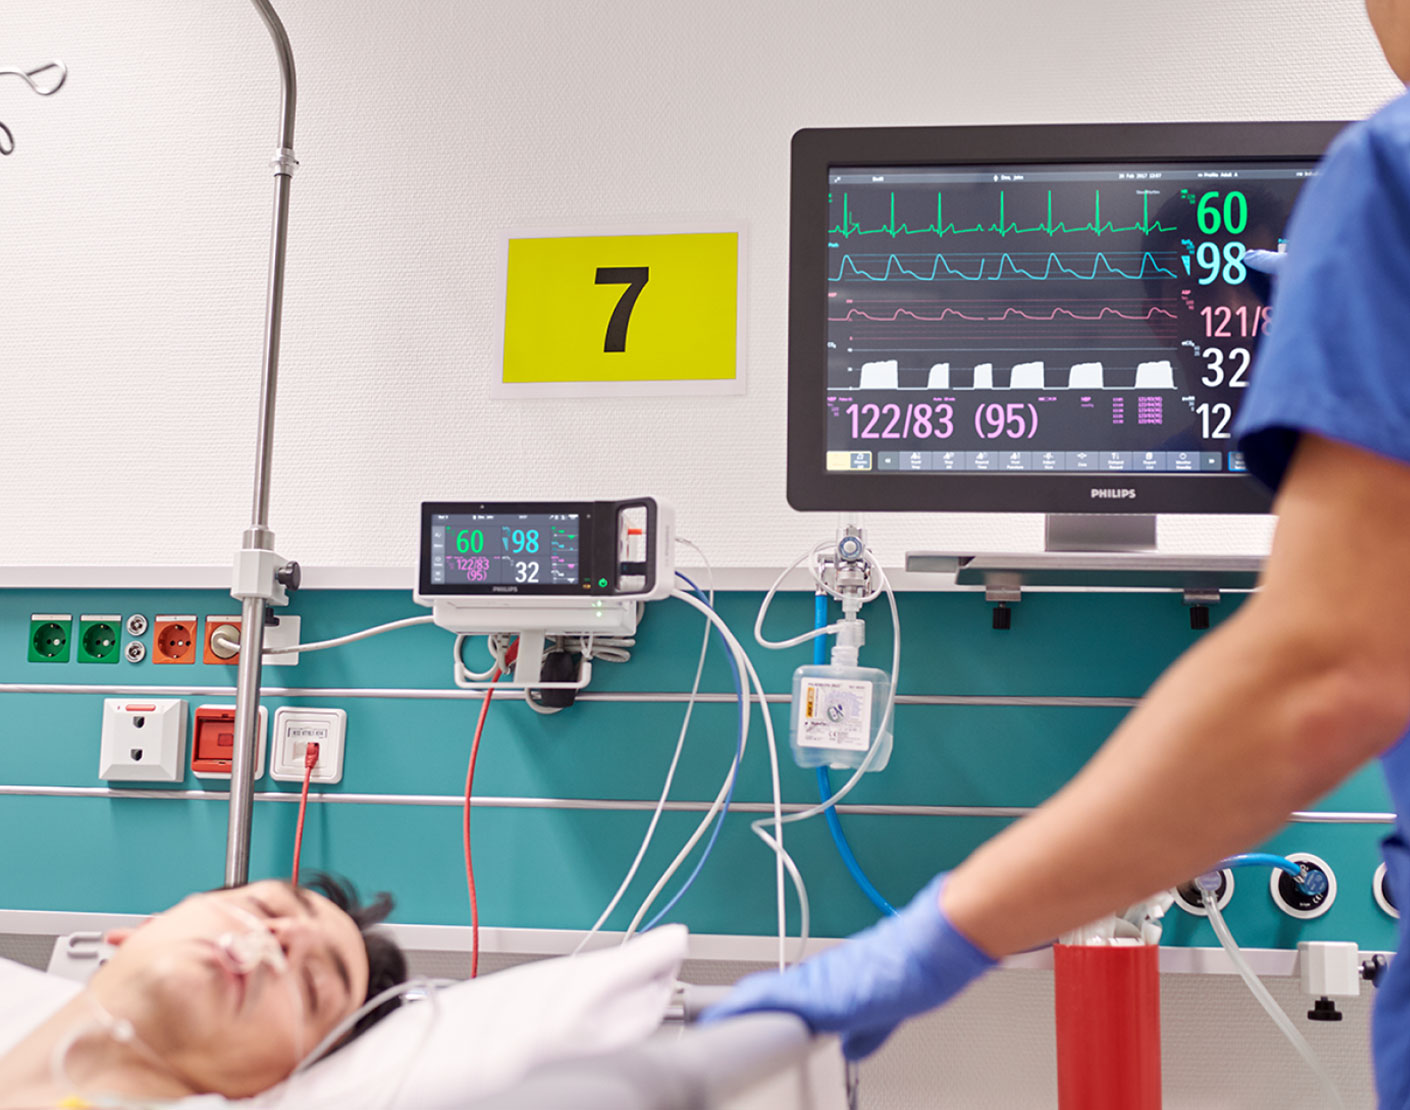 Two screens show patient status as the patient lies on bed